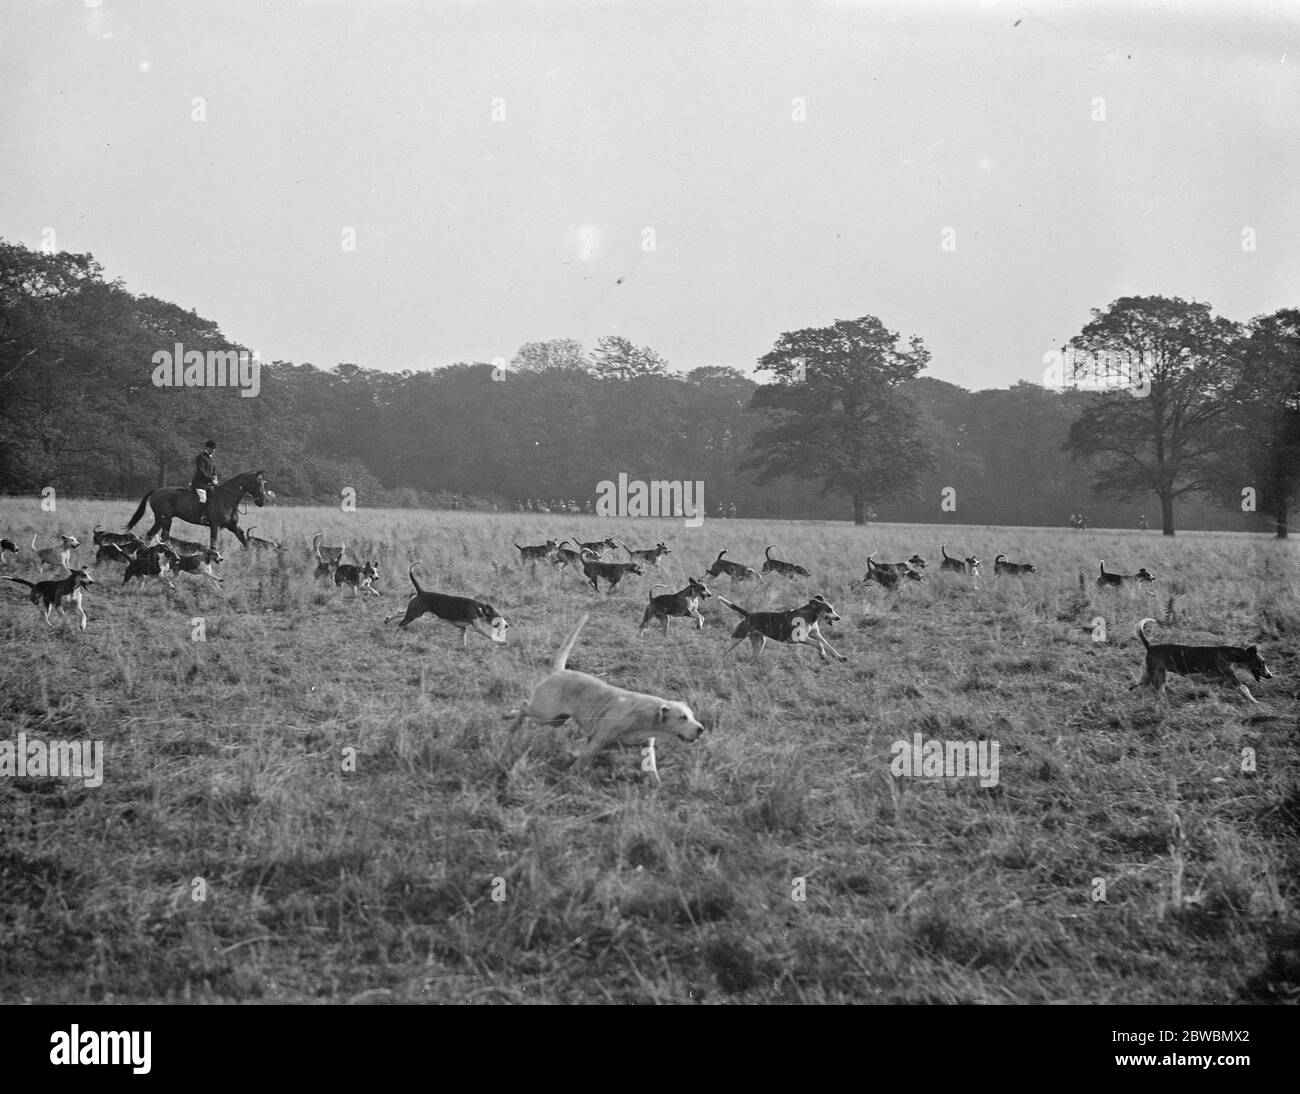 Hunting south hounds Stock Photo